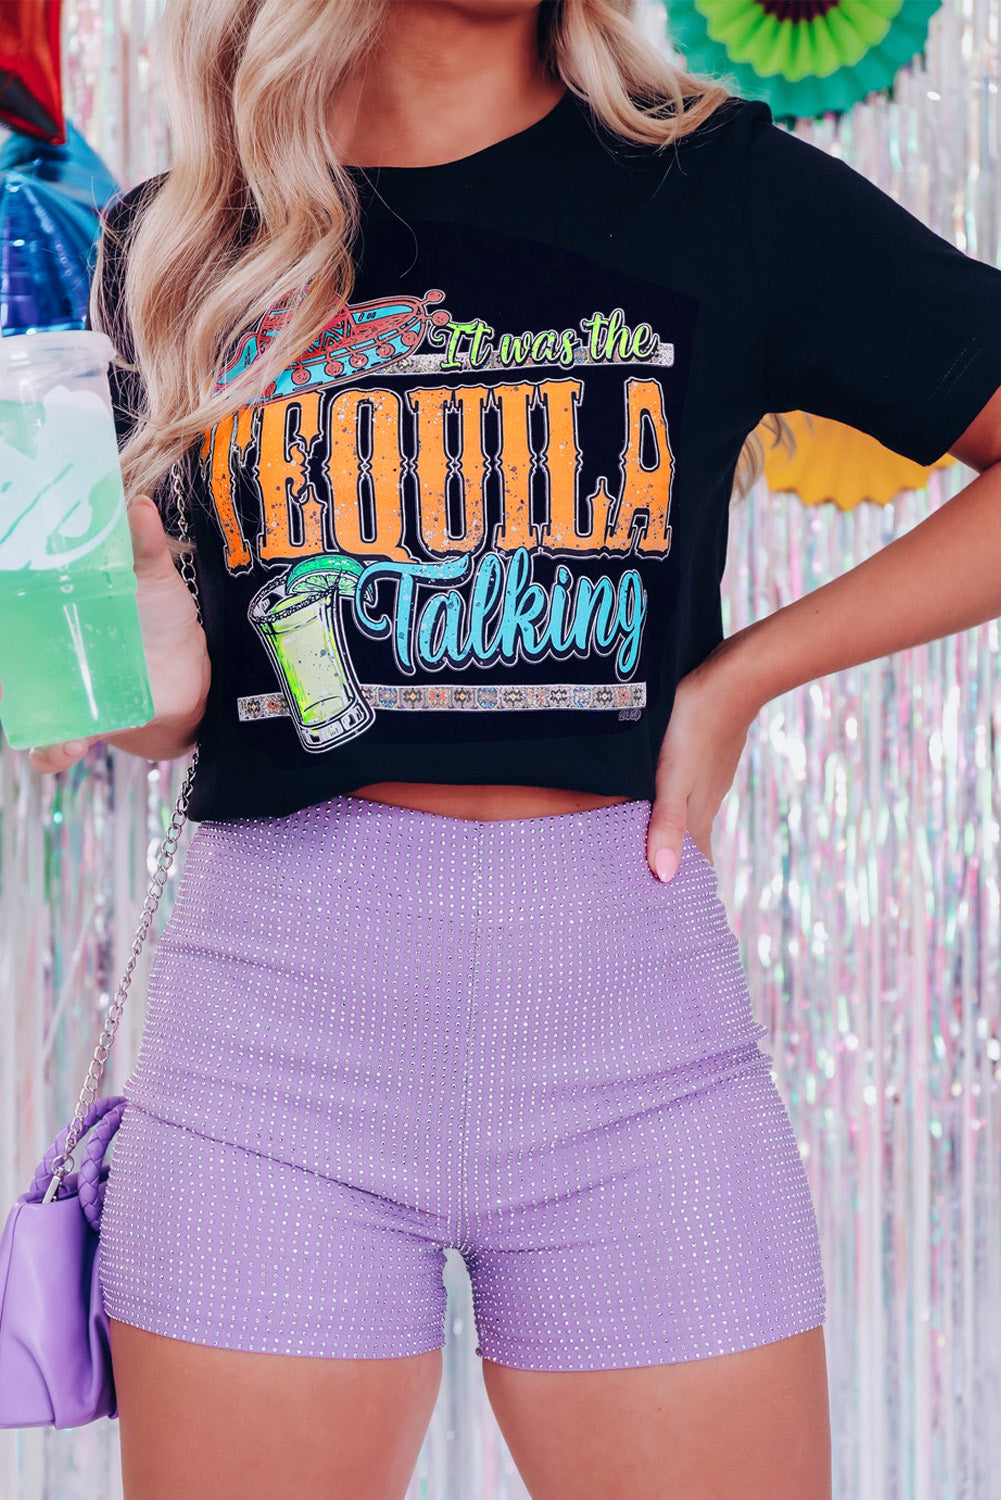 Black It Was The Tequila Talking Graphic Short Sleeve T-shirt